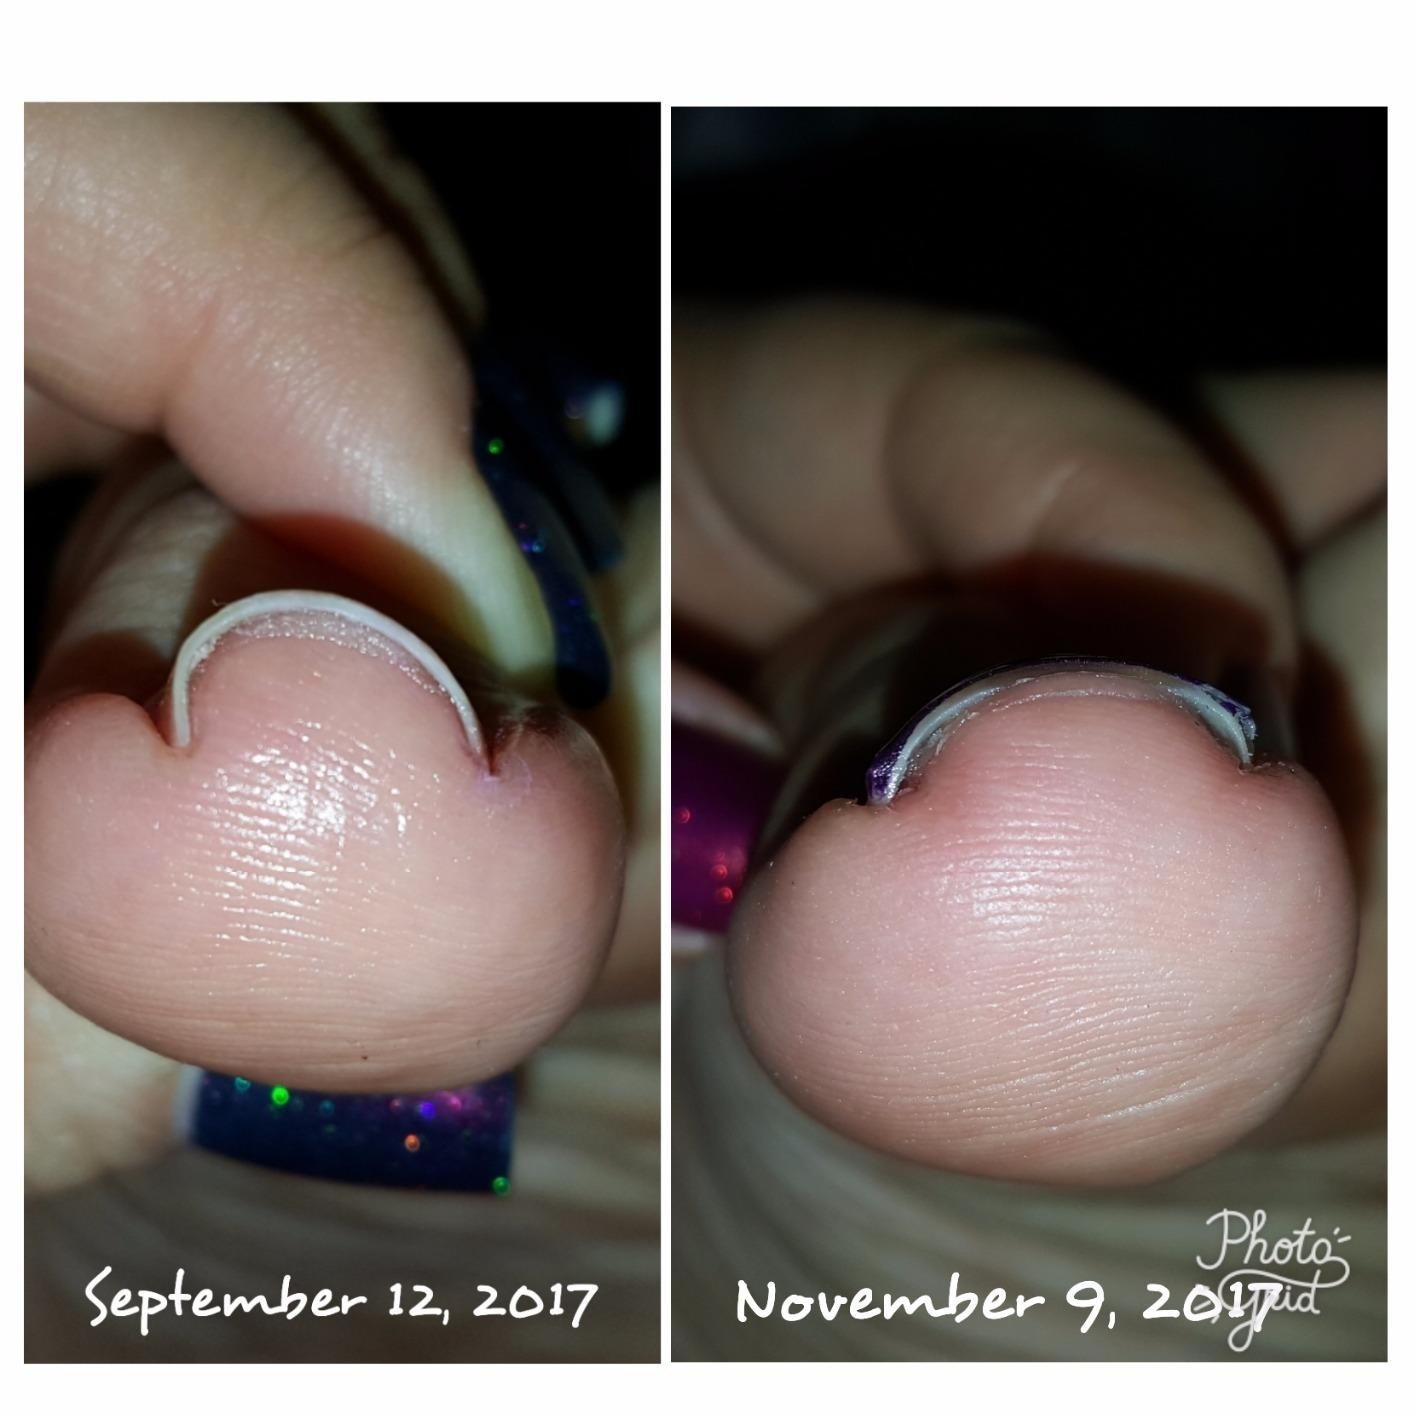 reviewer photo showing their curved nail completely corrected after wearing the brace for two months